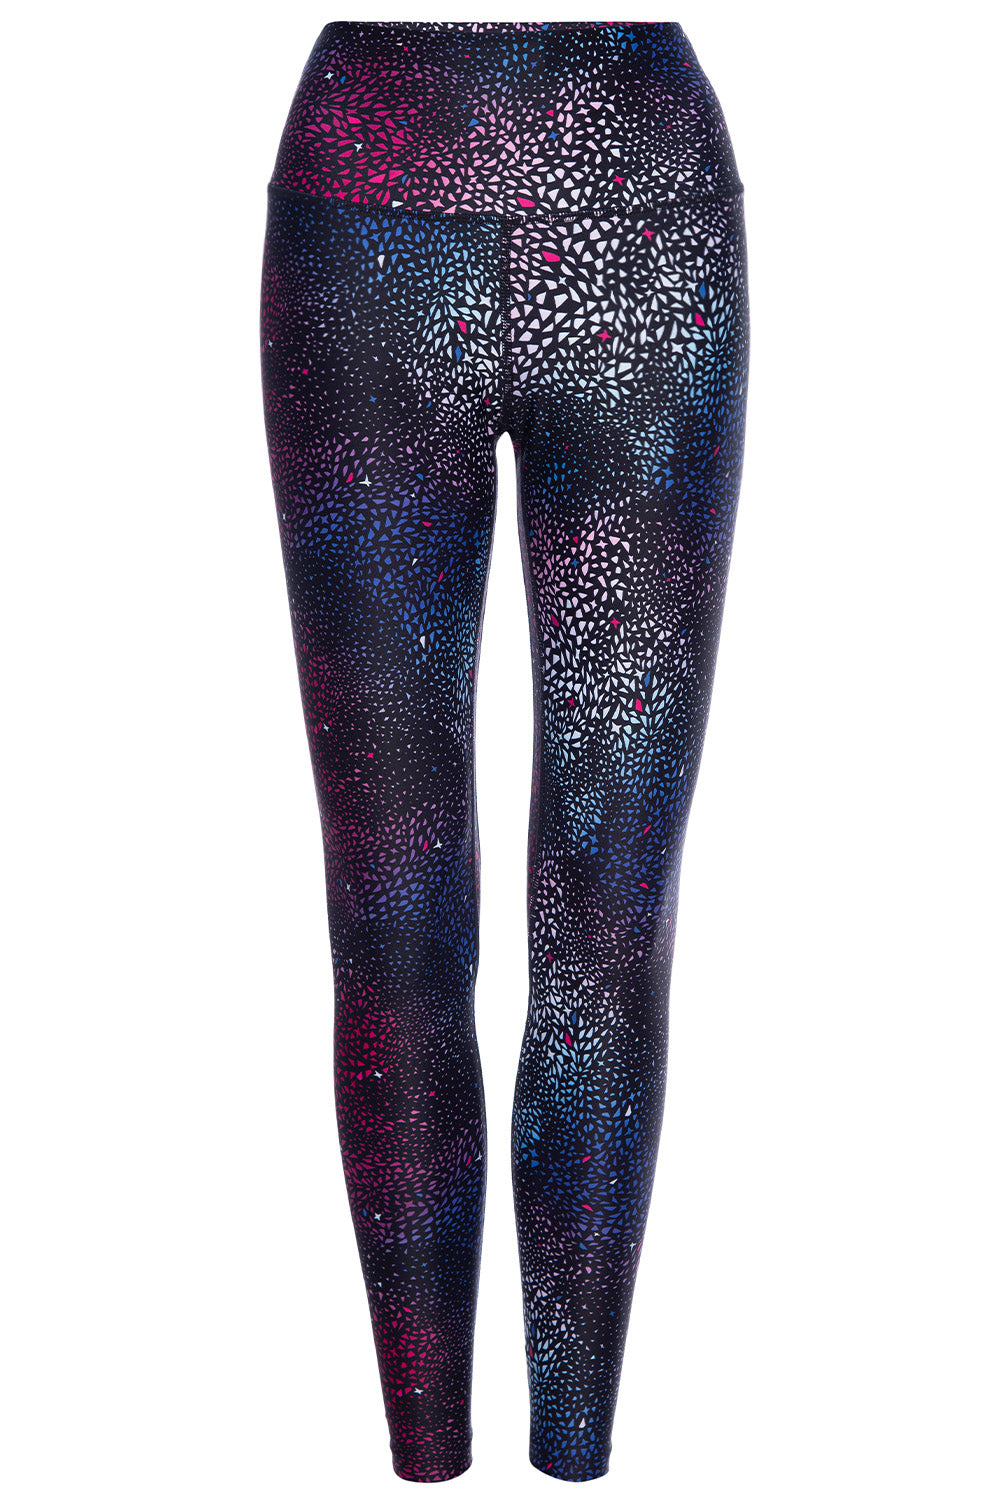 Soho Galaxy active legging on white background front view.